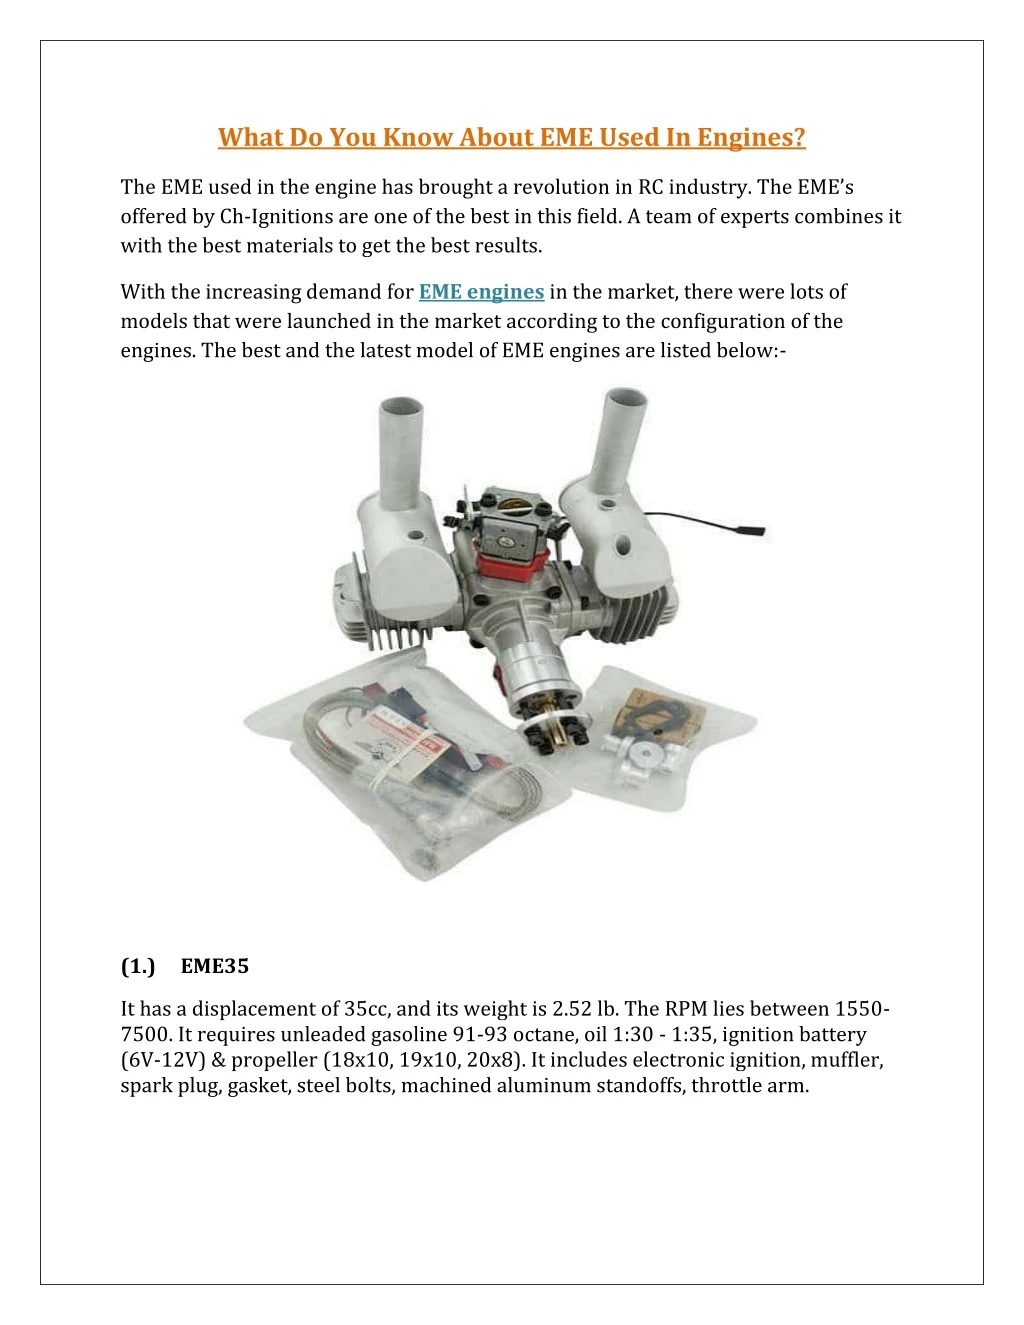 what do you know about eme used in engines